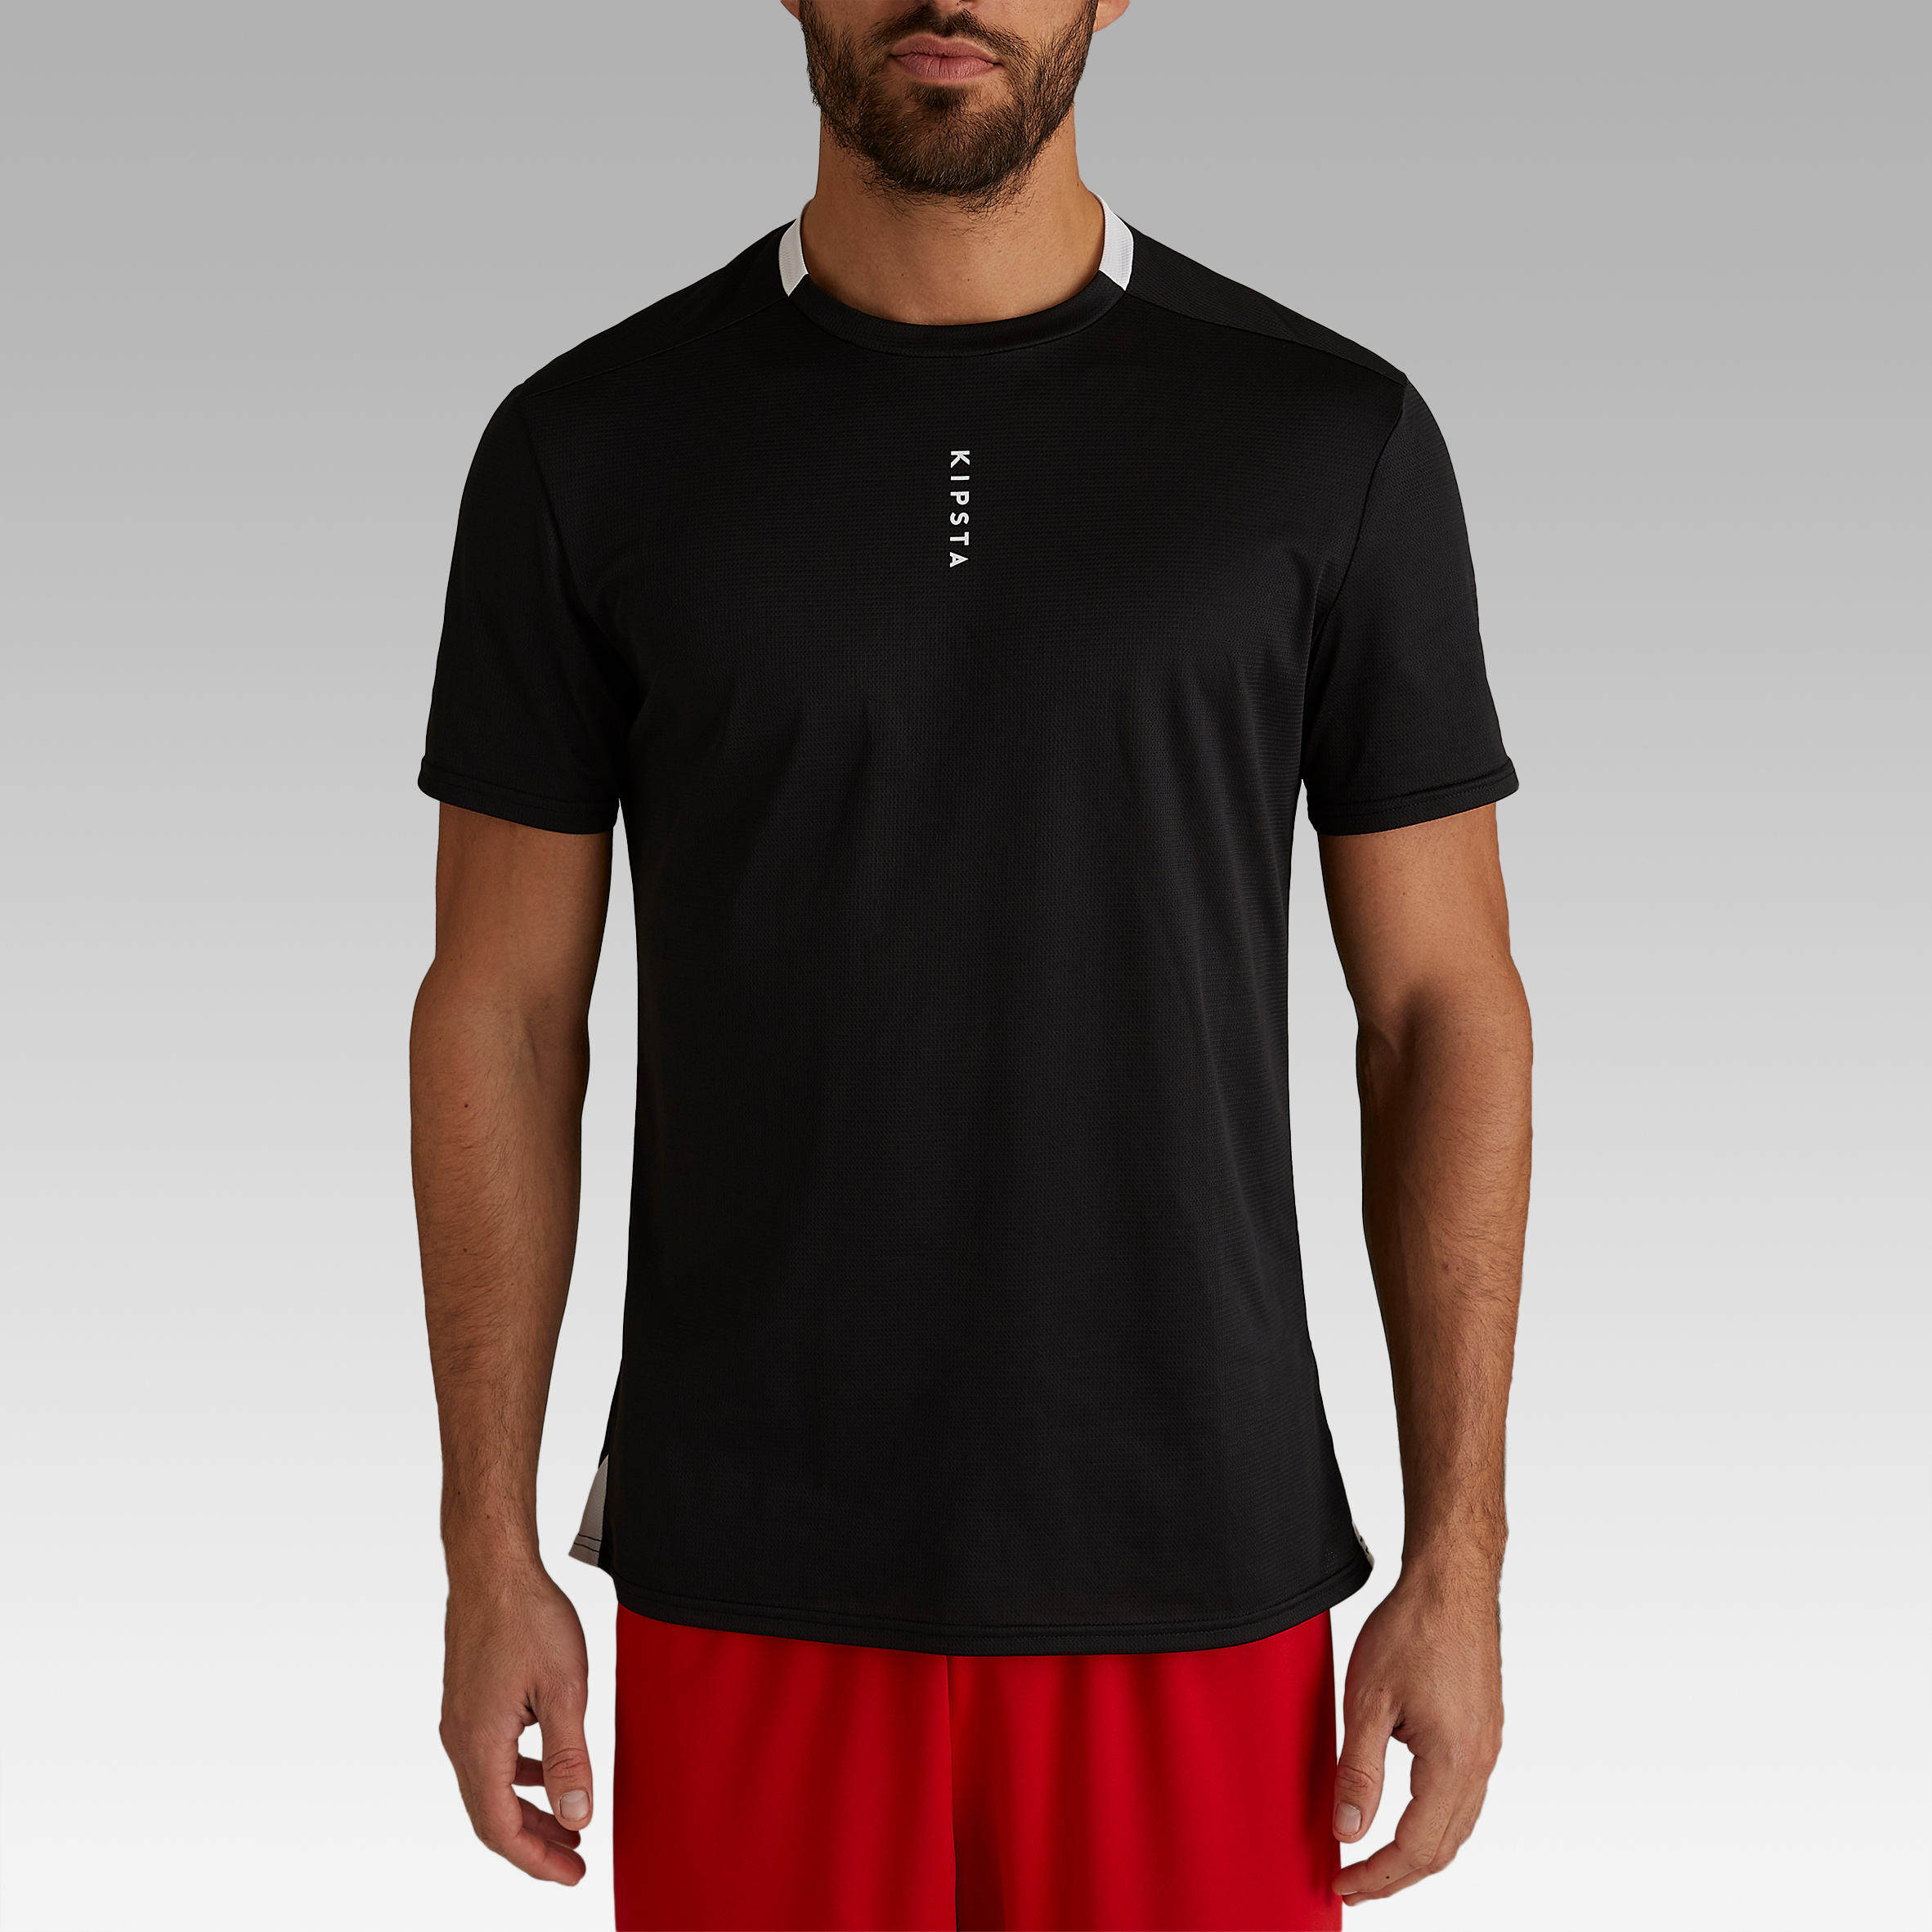 football jersey and shorts online india